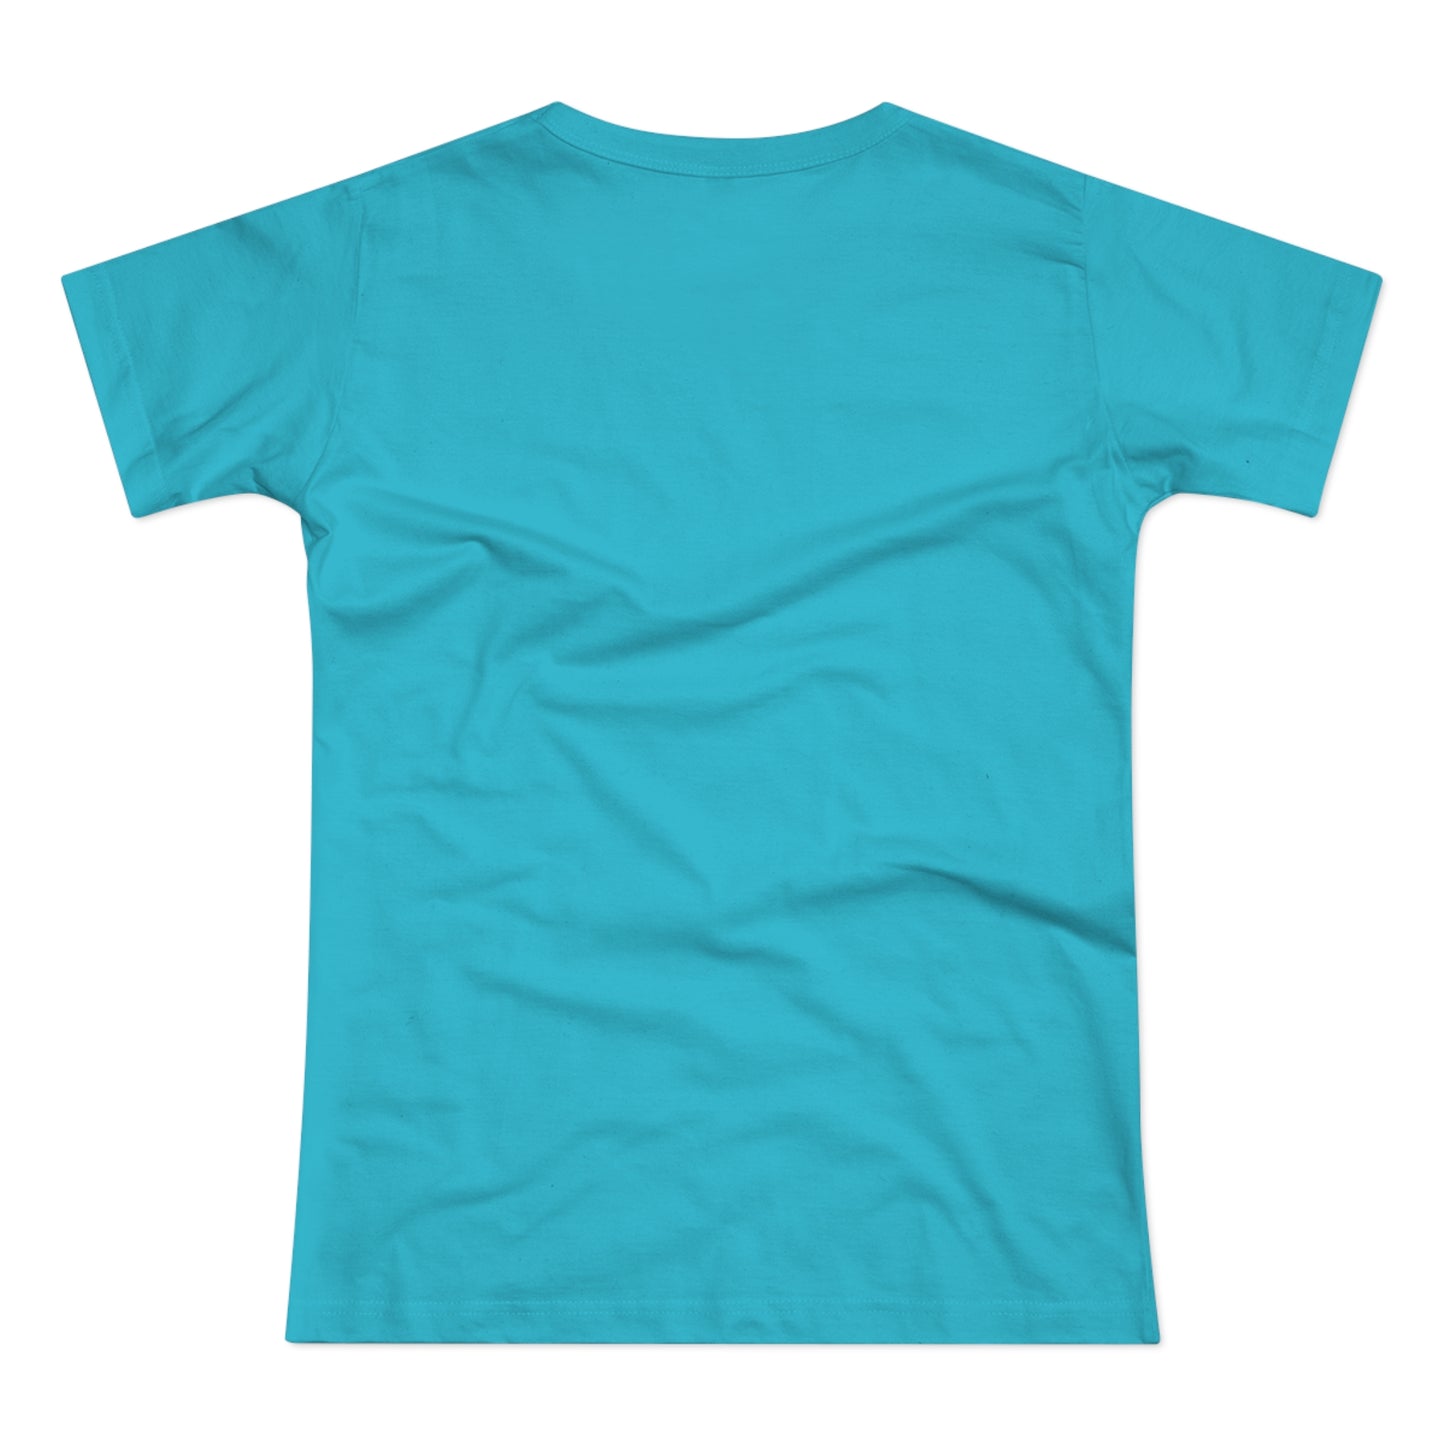 a turquoise t - shirt with a white background